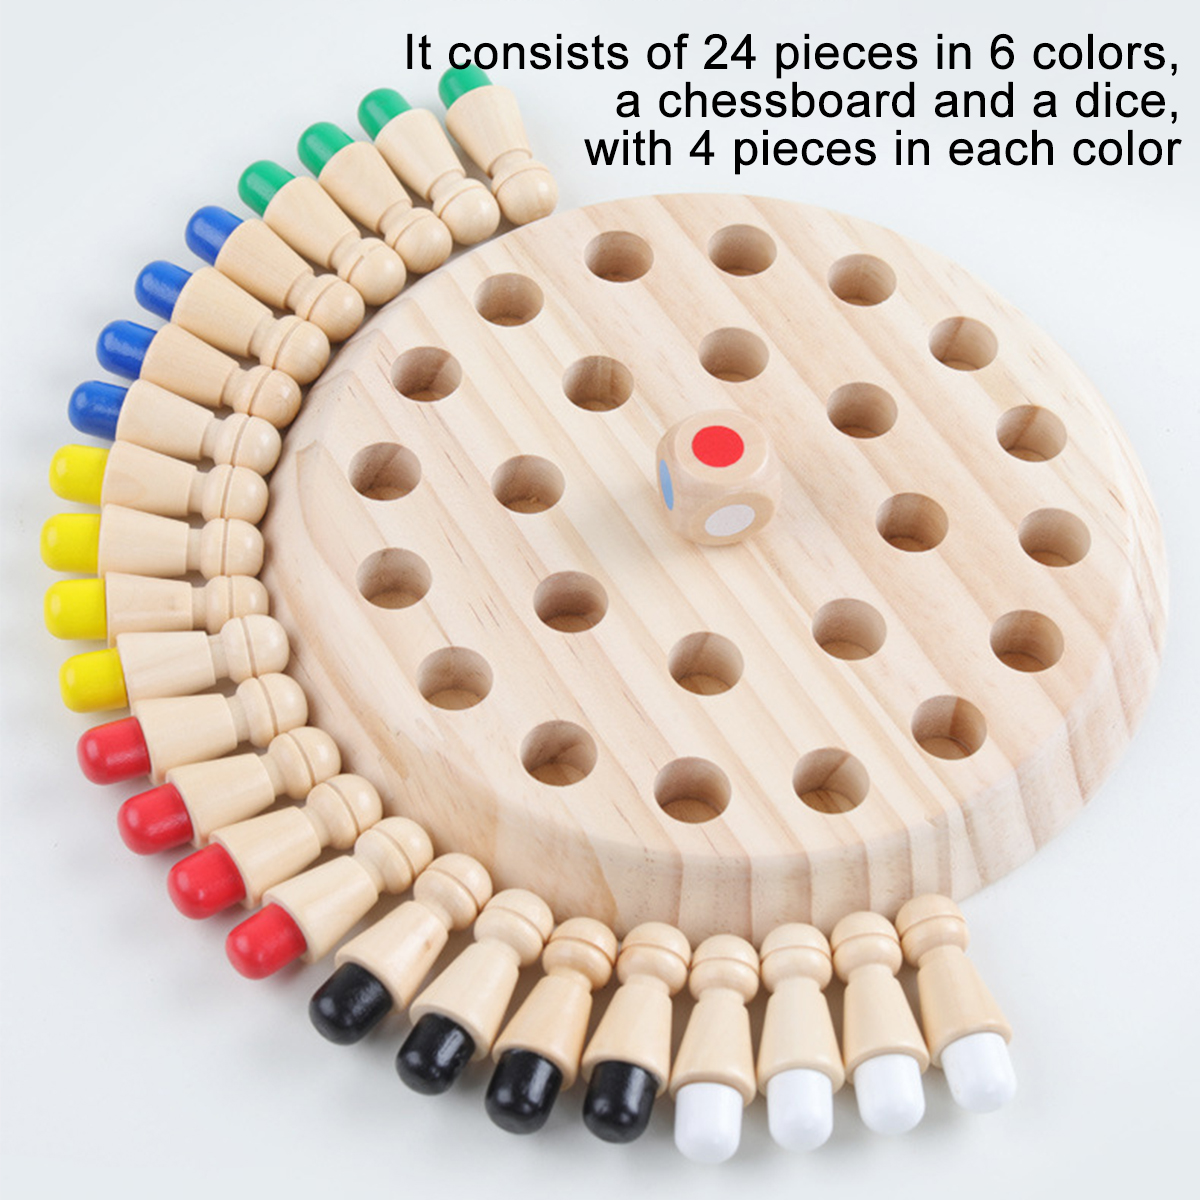 Montessori-Wooden-Colorful-Memory-Chess-Game-Clip-Beads-3D-Puzzle-Learning-Educational-Toys-for-Chil-1723192-7